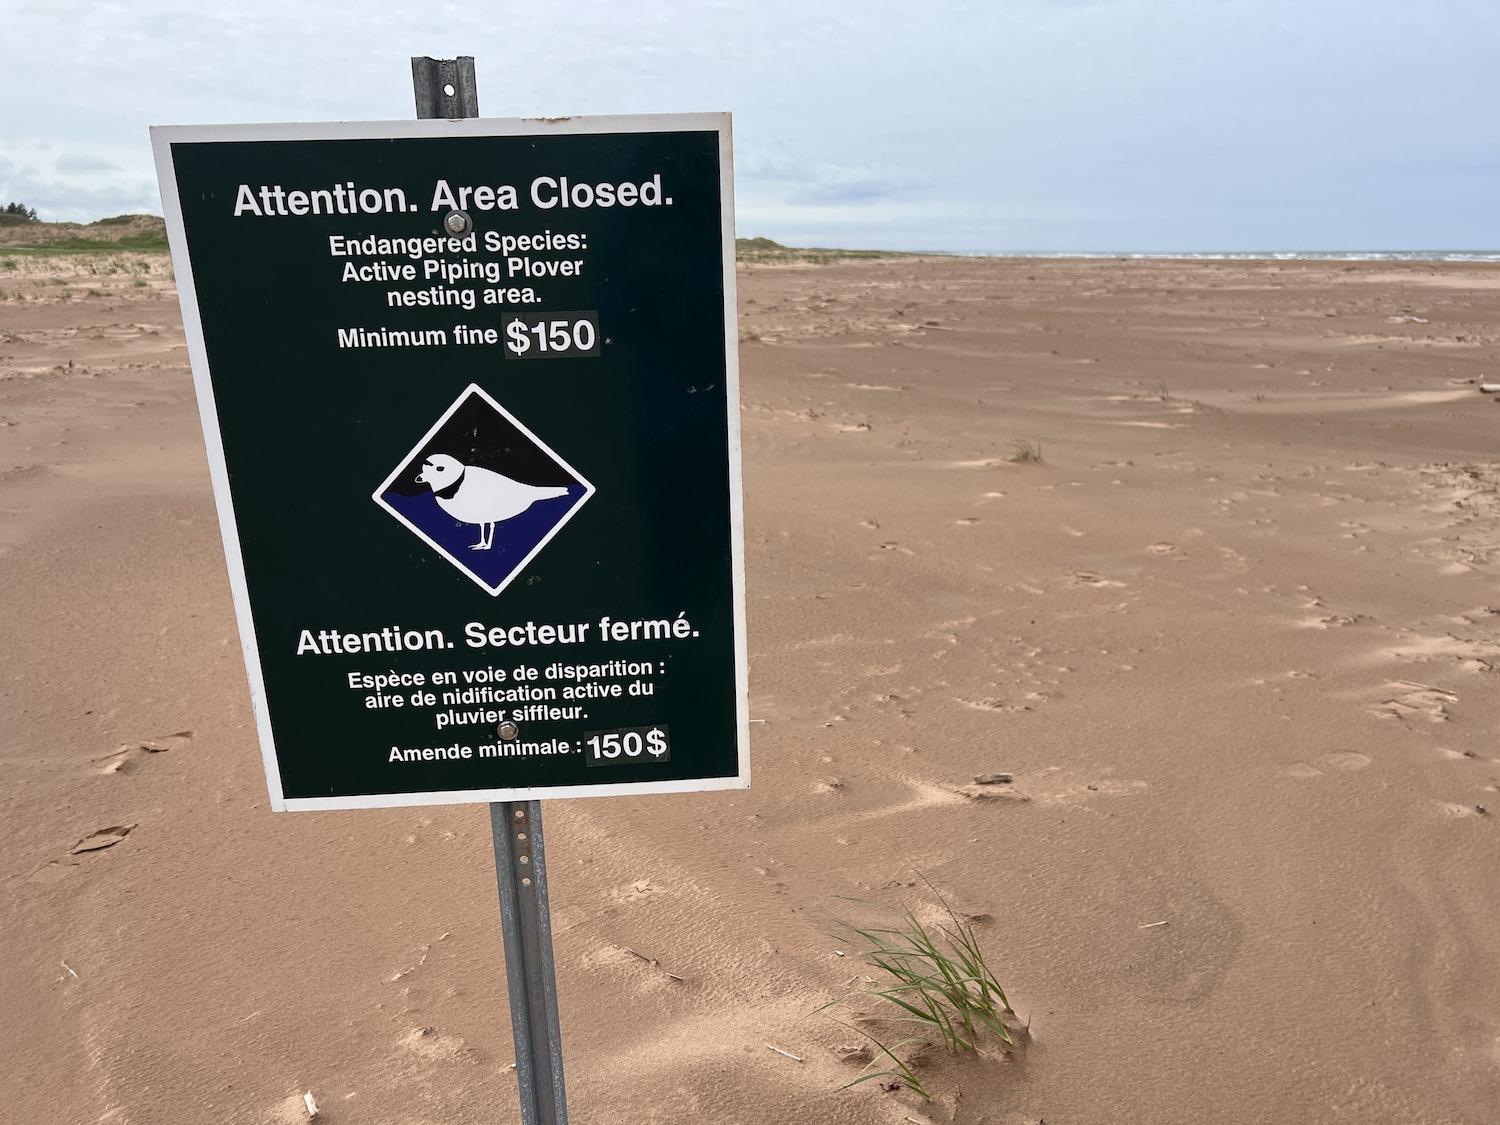 Parks Canada uses a variety of bilingual signs to warn people about Piping Plover beach closures.